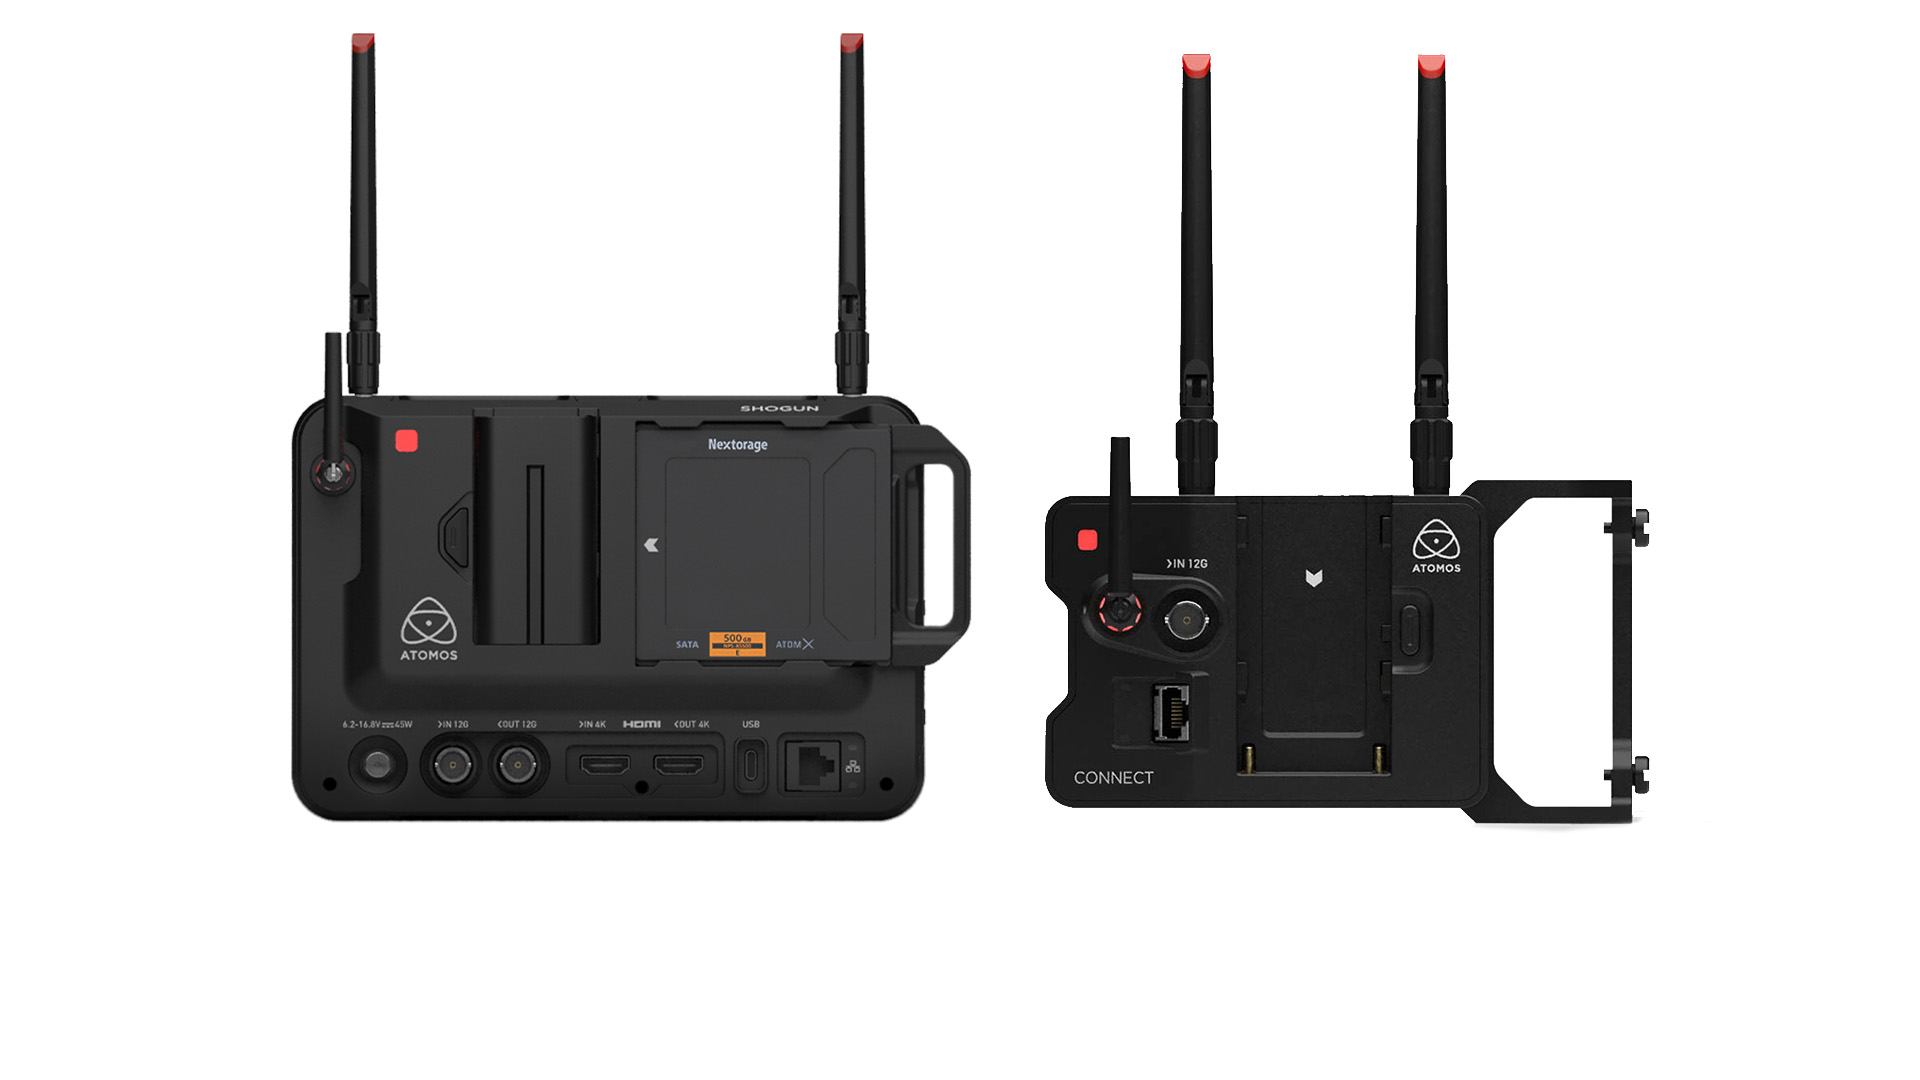 ATOMOS unveils network-connected devices with support for Frame.io